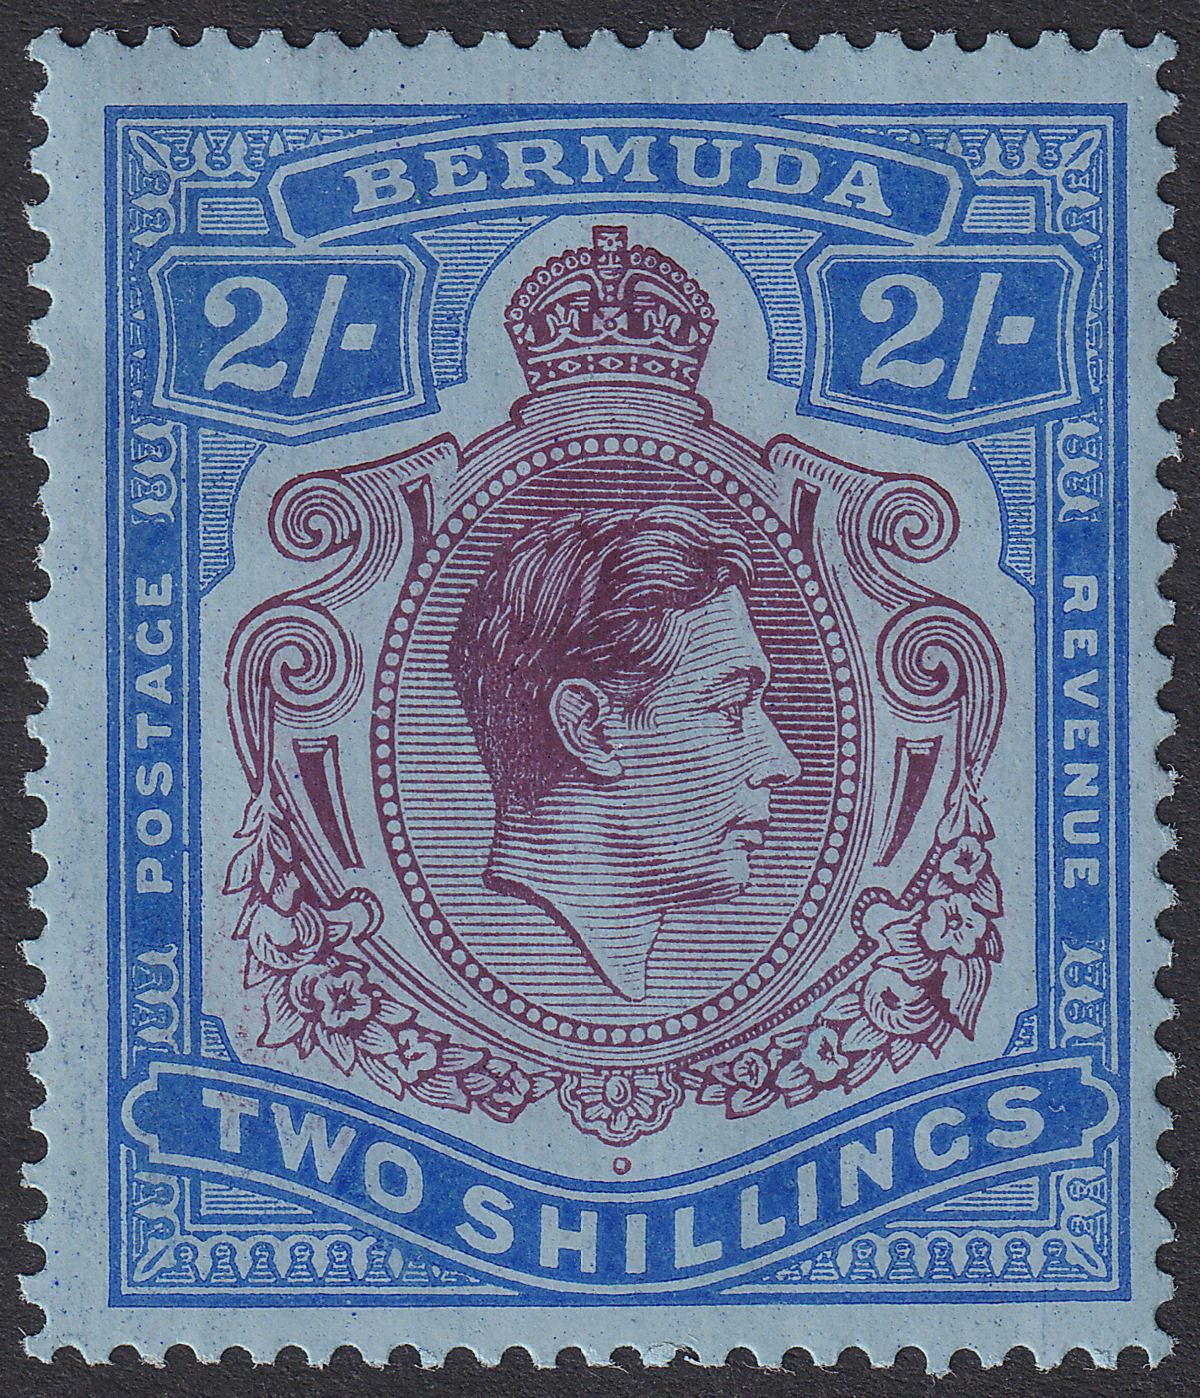 Bermuda 1941 KGVI 2sh Early State Lower Right Scroll Broken Tail Mint SG116bc